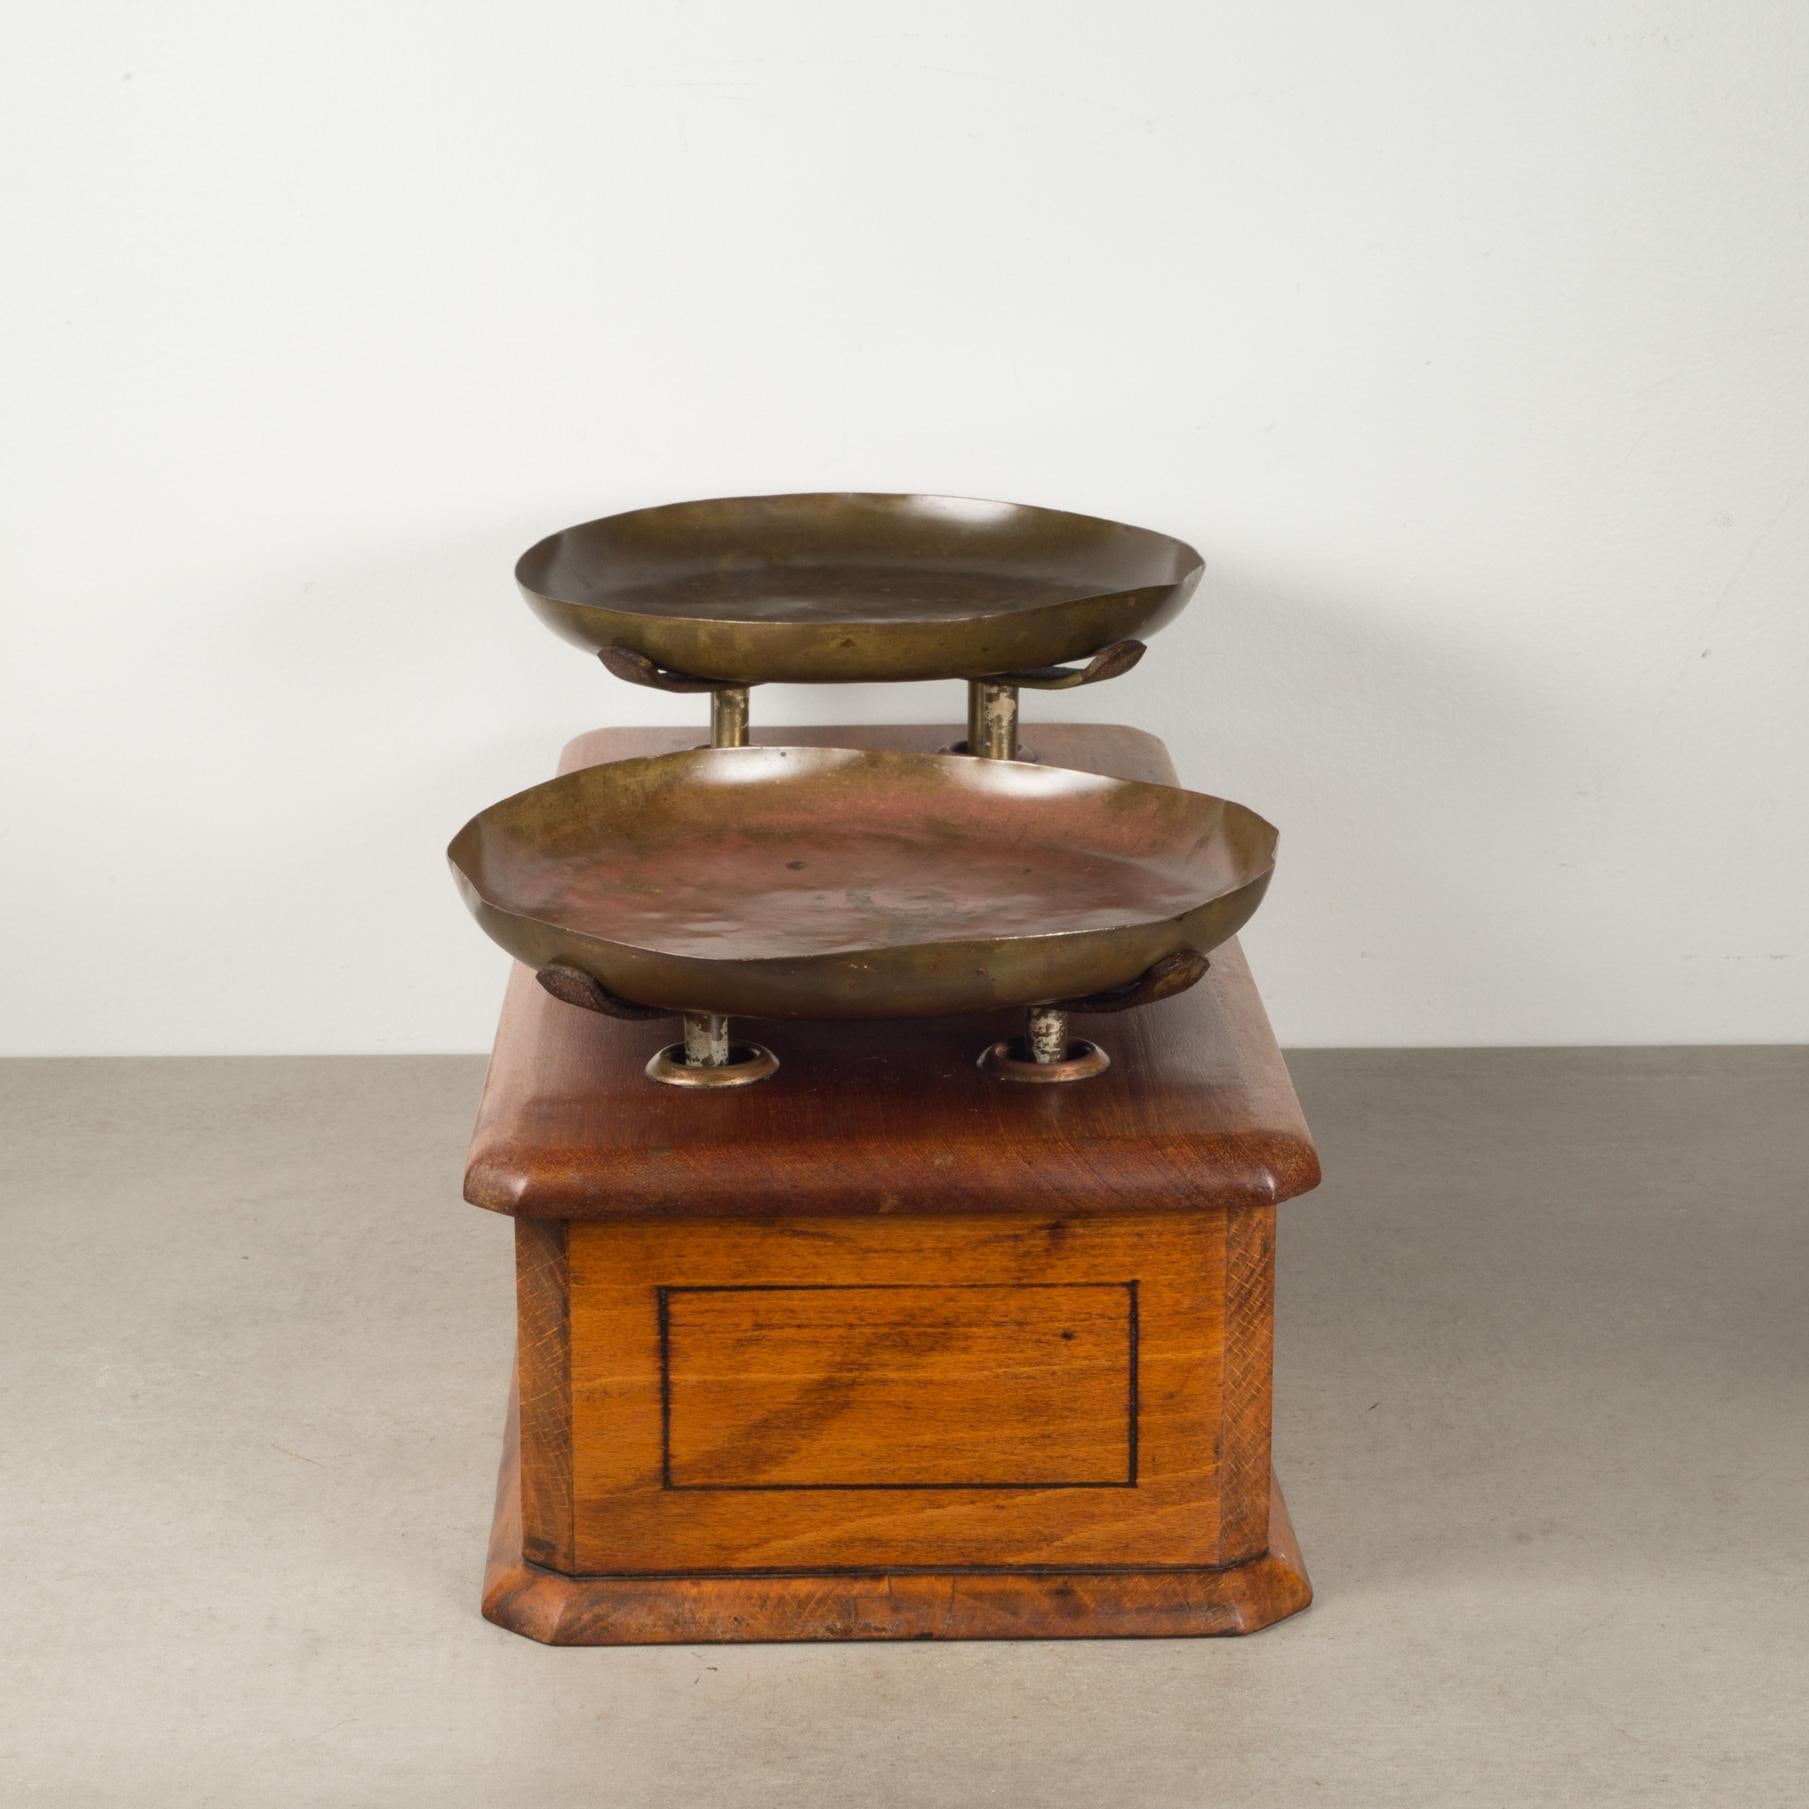 Late 19th French Mahogany & Brass Balance Scale, c.1870 For Sale 1